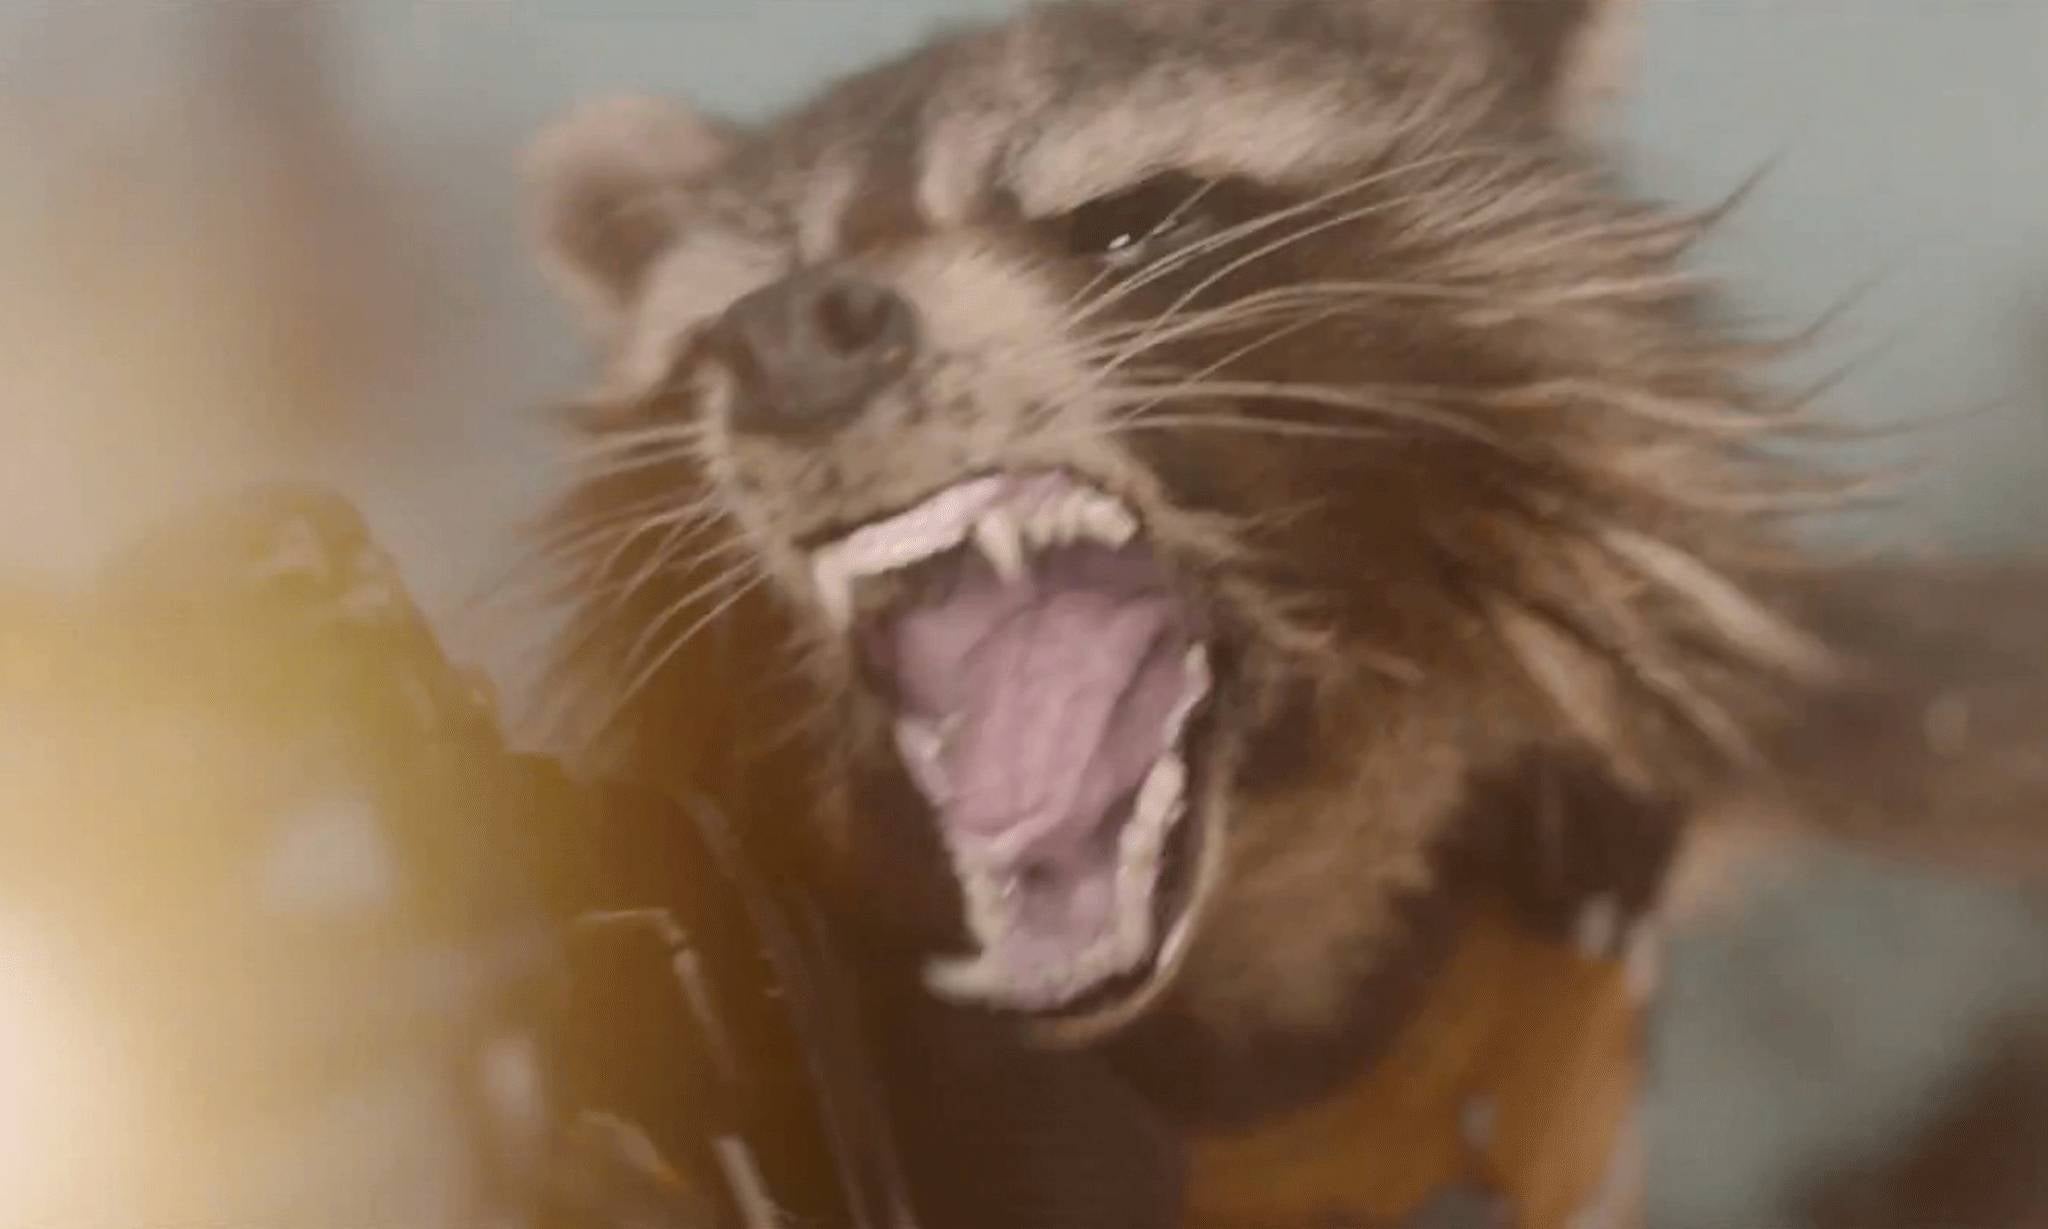 Bradley Cooper voices Rocket Raccoon in Guardians of the Galaxy